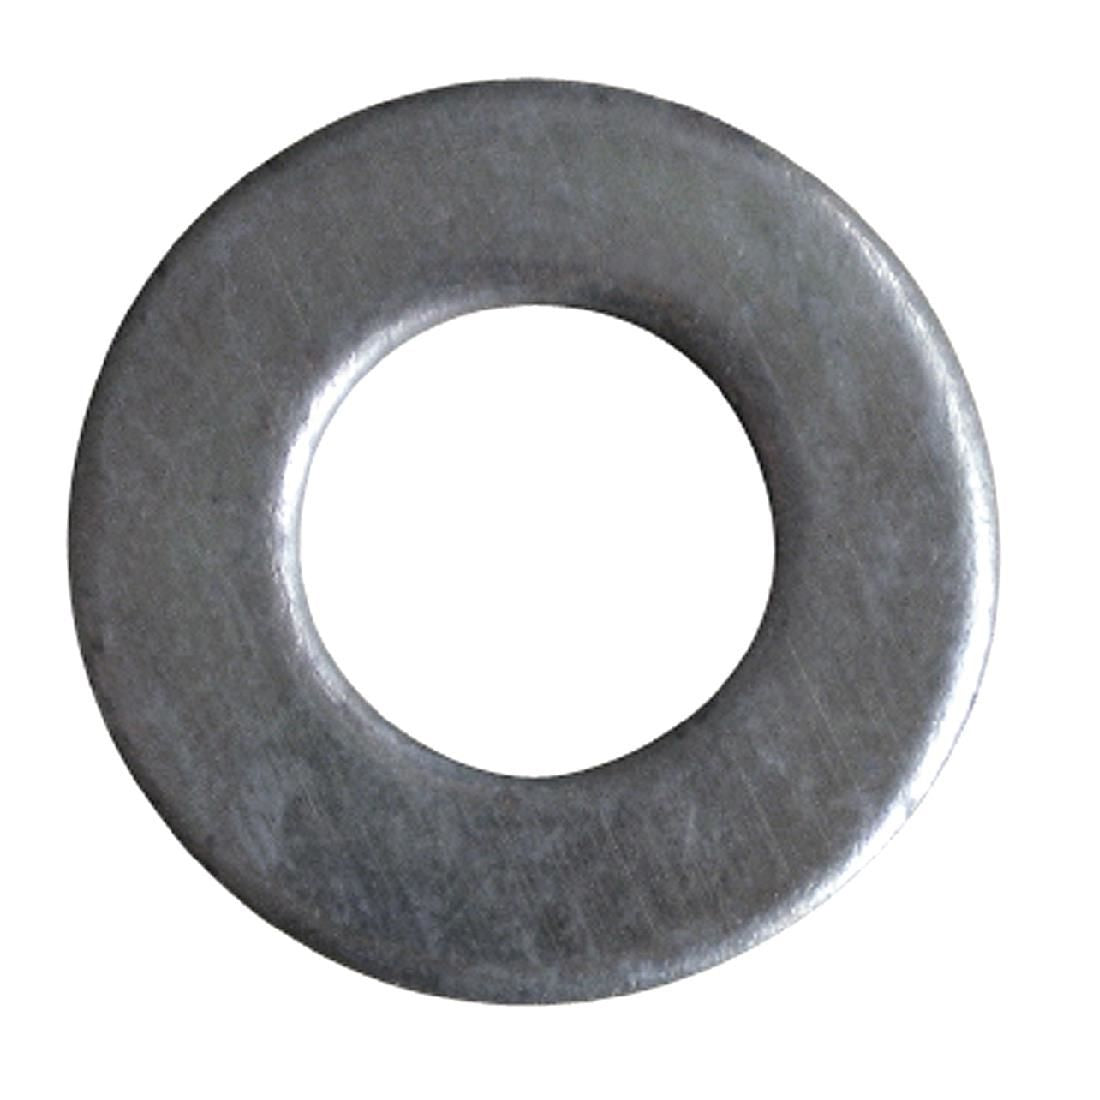 AB838 Screws, Spring Washers & Flat Washers JD Catering Equipment Solutions Ltd